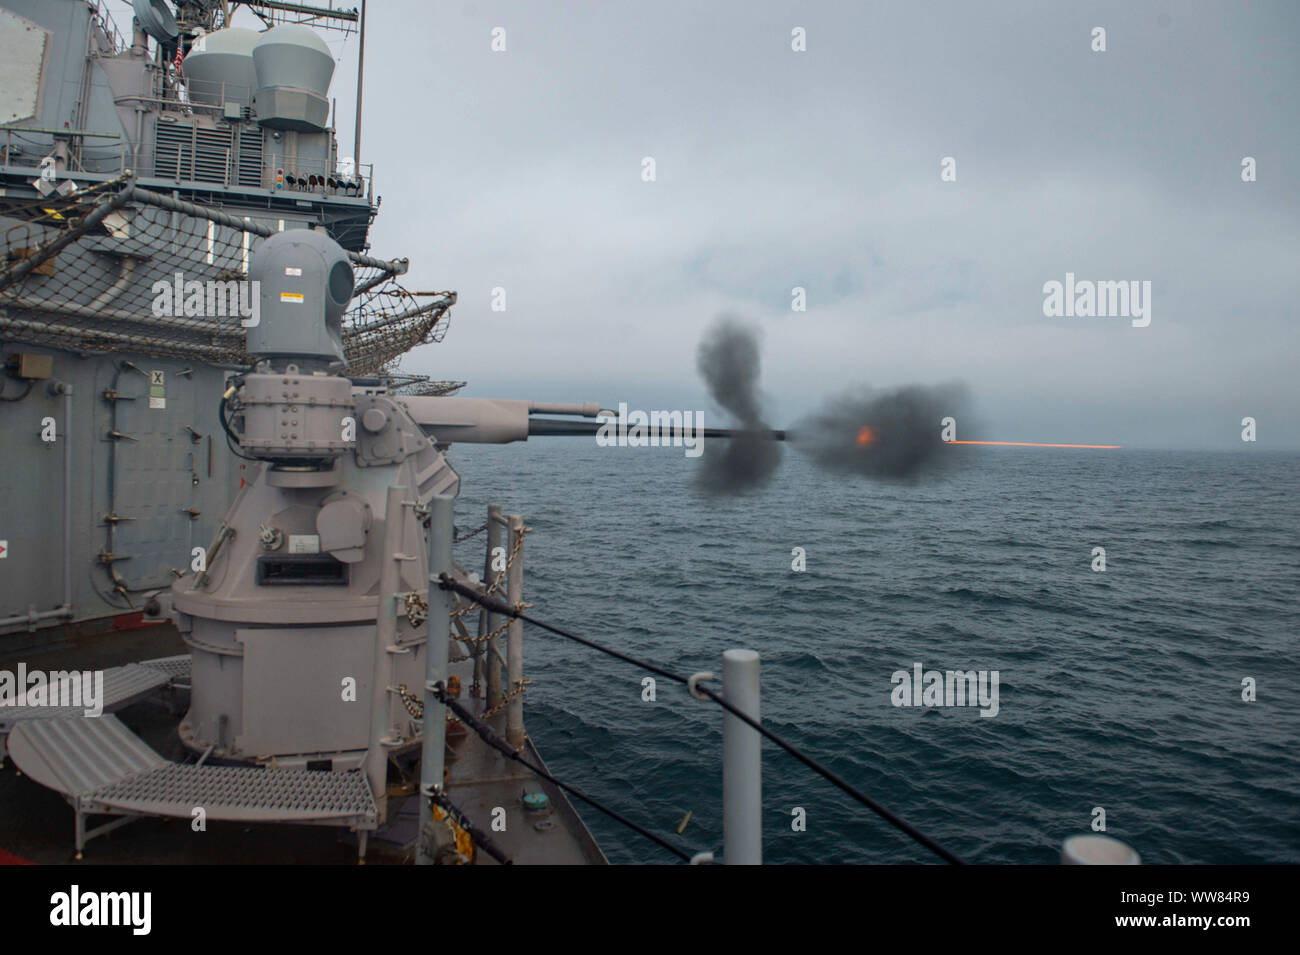 190909-N-DV626-0167  ATLANTIC OCEAN (Sept. 9, 2019) The Ticonderoga-class guided-missile cruiser USS Vella Gulf (CG 72) fires its 25mm weapons system from a weather deck during a Surface Warfare Advanced Tactical Training (SWATT) exercise with other U.S. Navy warships. Surface Warships assigned to the Eisenhower Carrier Strike Group are participating in the exercise in the Atlantic Ocean, off the coast of Florida, to maintain readiness, proficiency and lethality. (U.S. Navy photo by Mass Communication Specialist 3rd Class Gian Prabhudas) Stock Photo